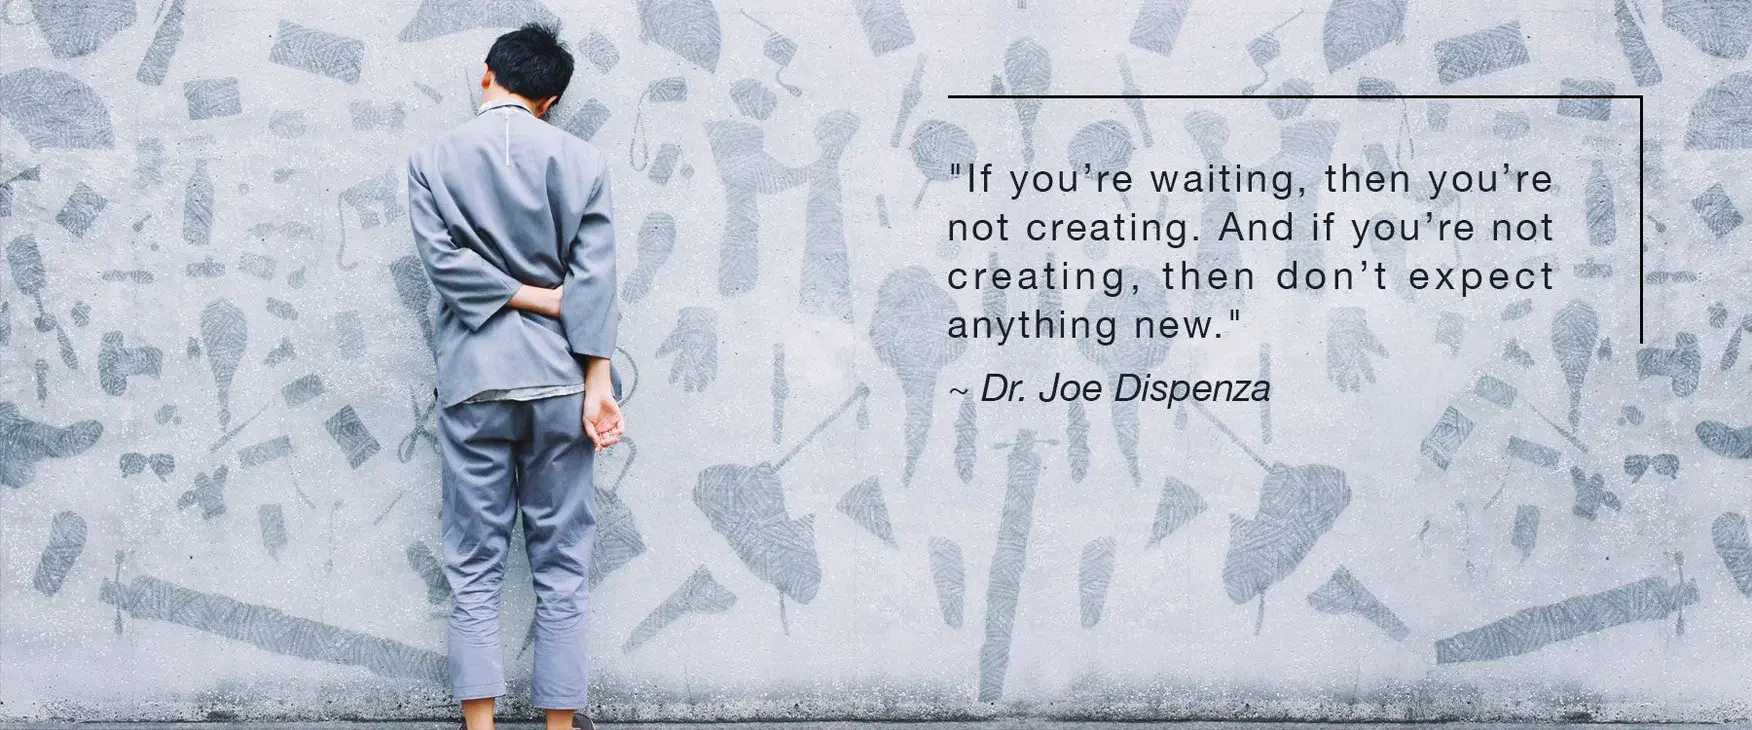 If You’re Waiting, You’re Not Creating